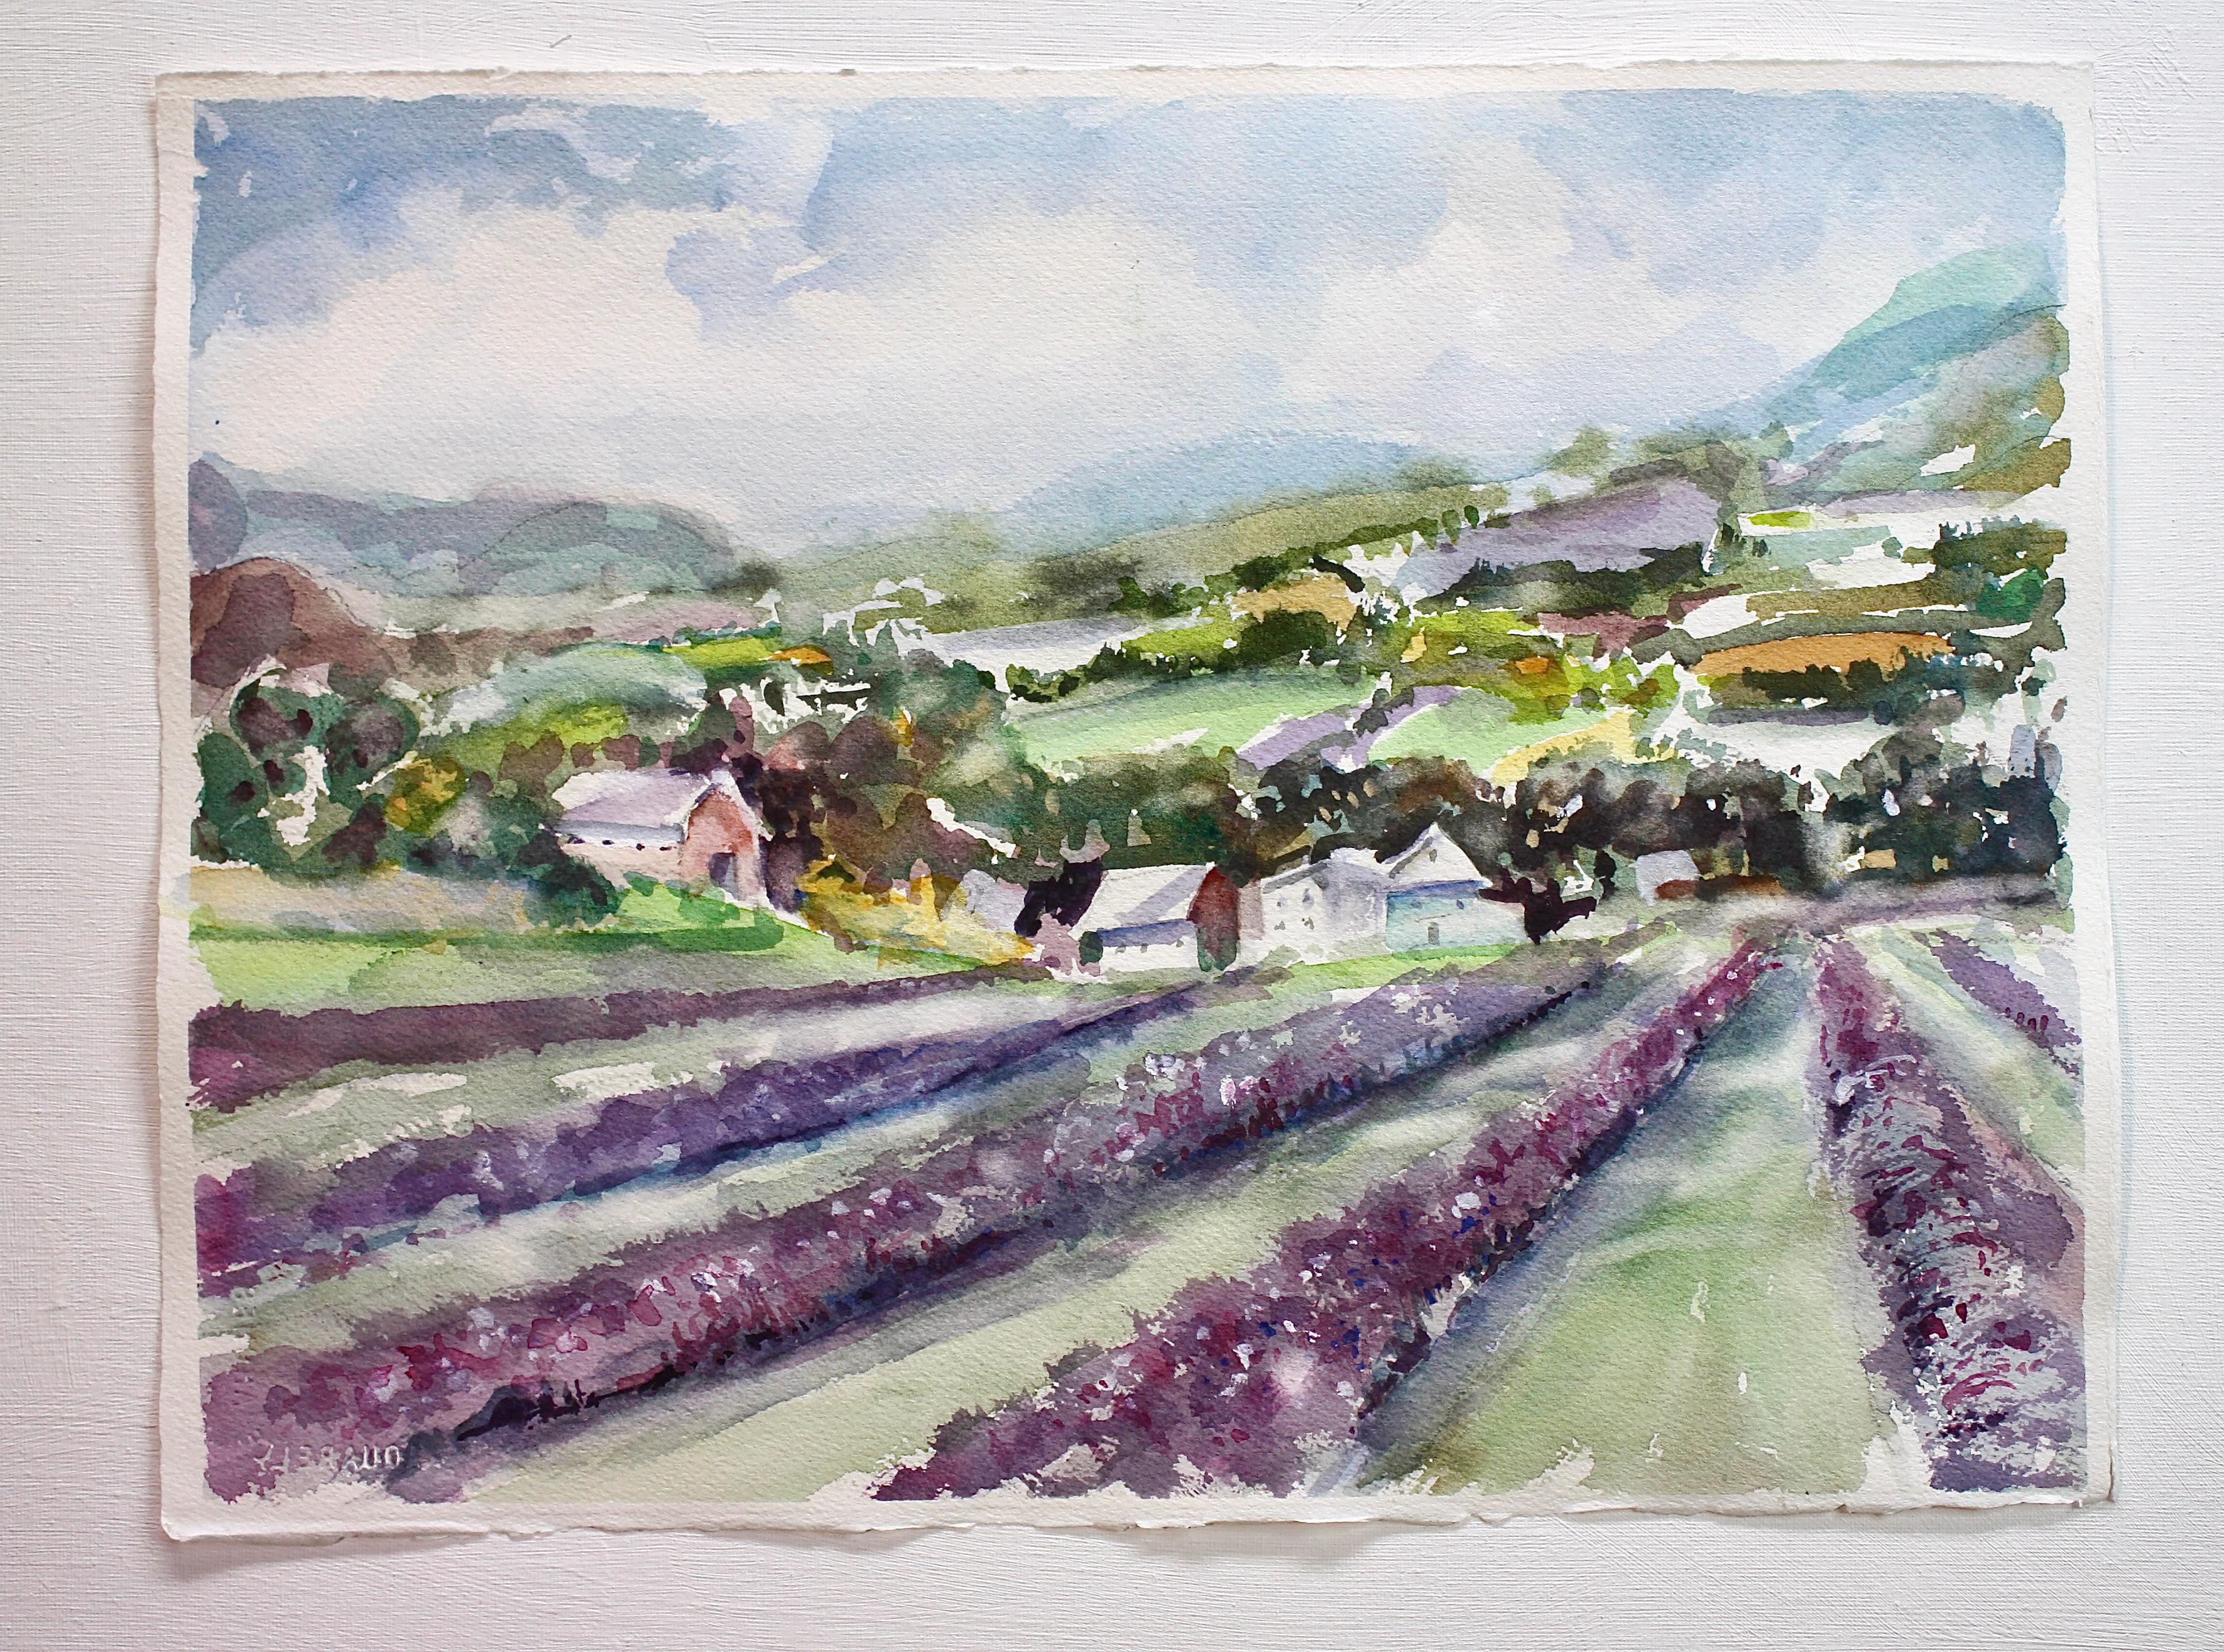 <p>Artist Comments<br>Artist Joe Giuffrida exhibits an elegant countryside landscape of Provence, France. Vivid lavenders flourish along the field and appear as rolling waves along the pasture. The gorgeous blossoms lead to a charming view of a